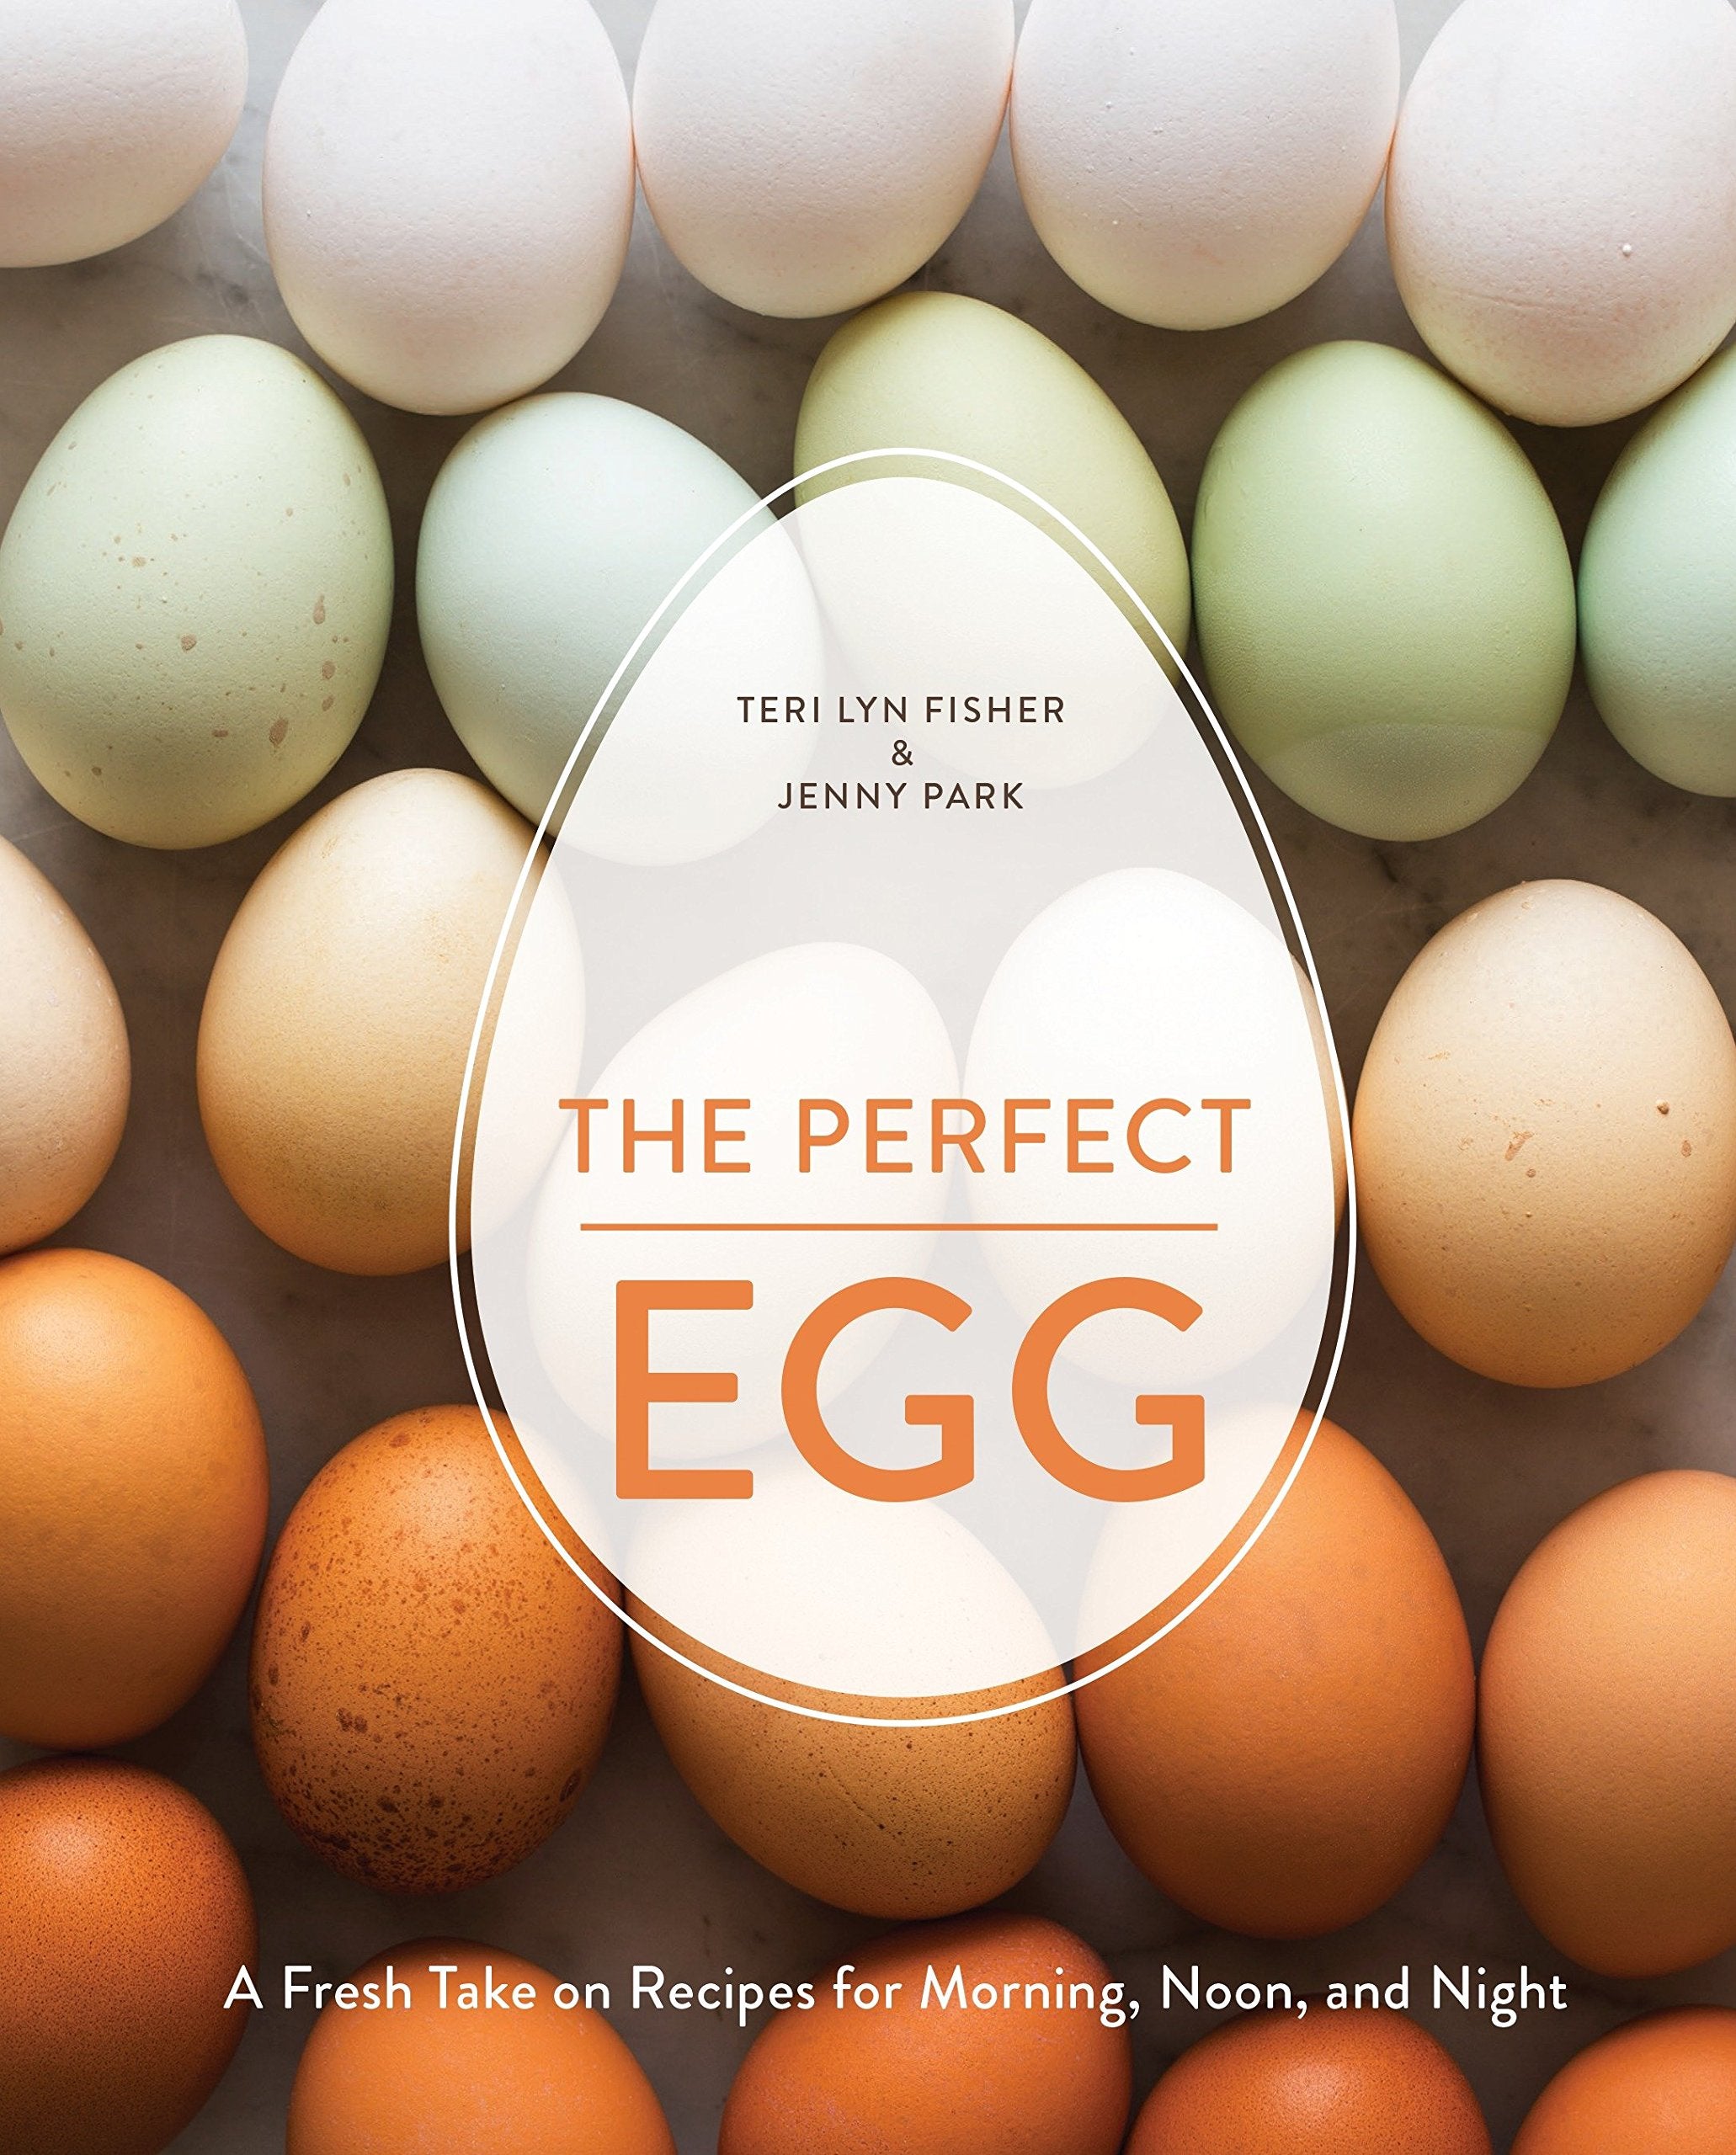 The Perfect Egg: A Fresh Take on Recipes for Morning, Noon, and Night (Teri Lyn Fisher, Jenny Park)